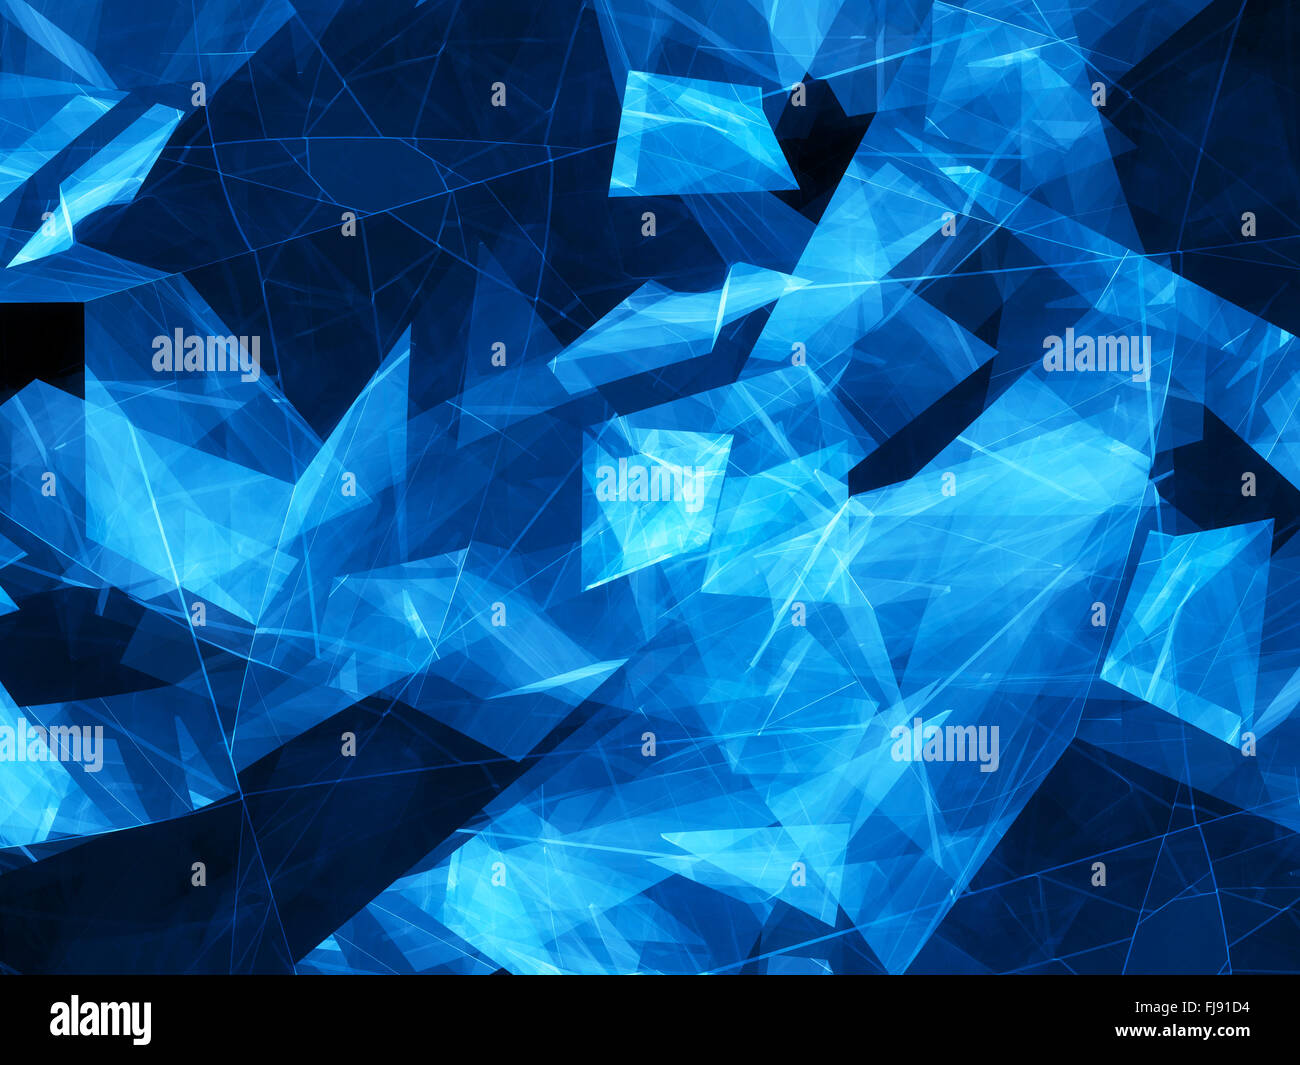 Blue glowing shapes with lines design, computer generated abstract background Stock Photo